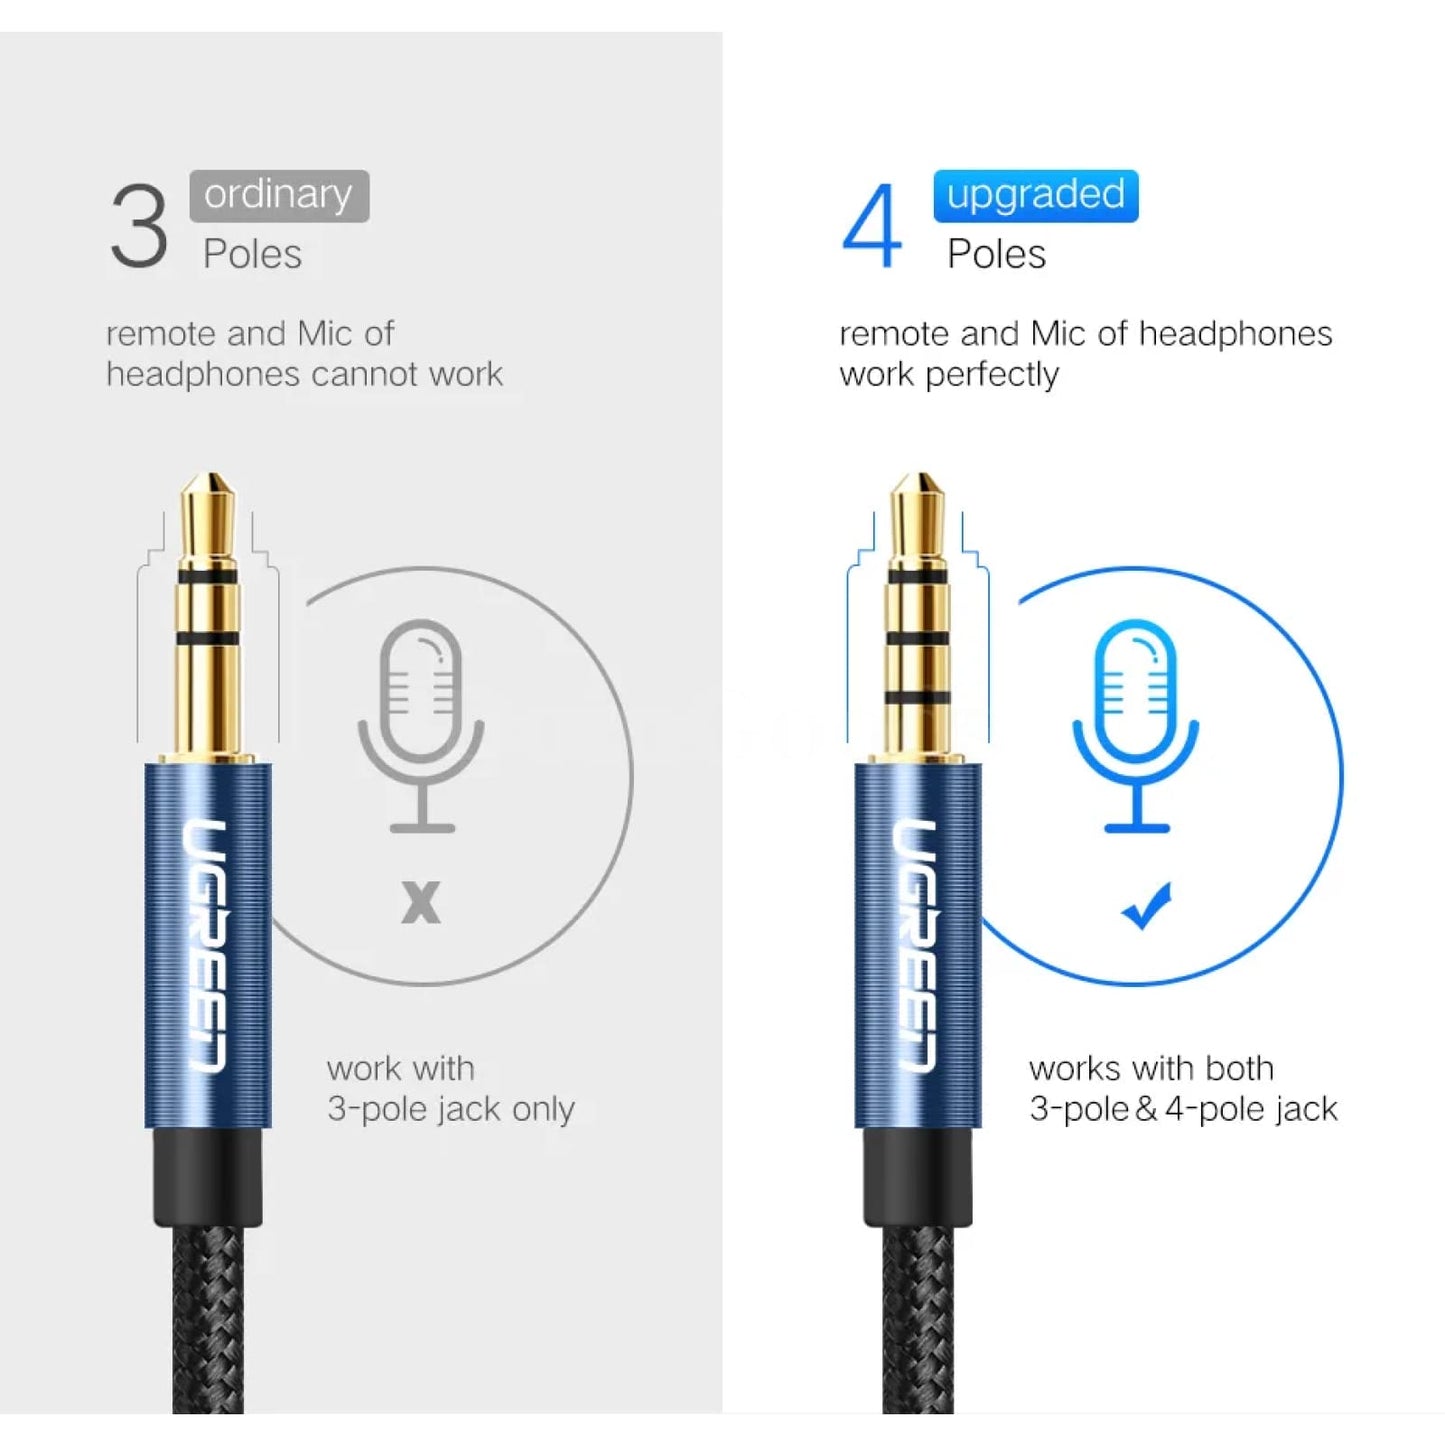 Ugreen 3.5Mm Audio Extension Cable - Stereo Aux Jack For Huawei P20 Lite Xiaomi Redmi 5 Plus Pc